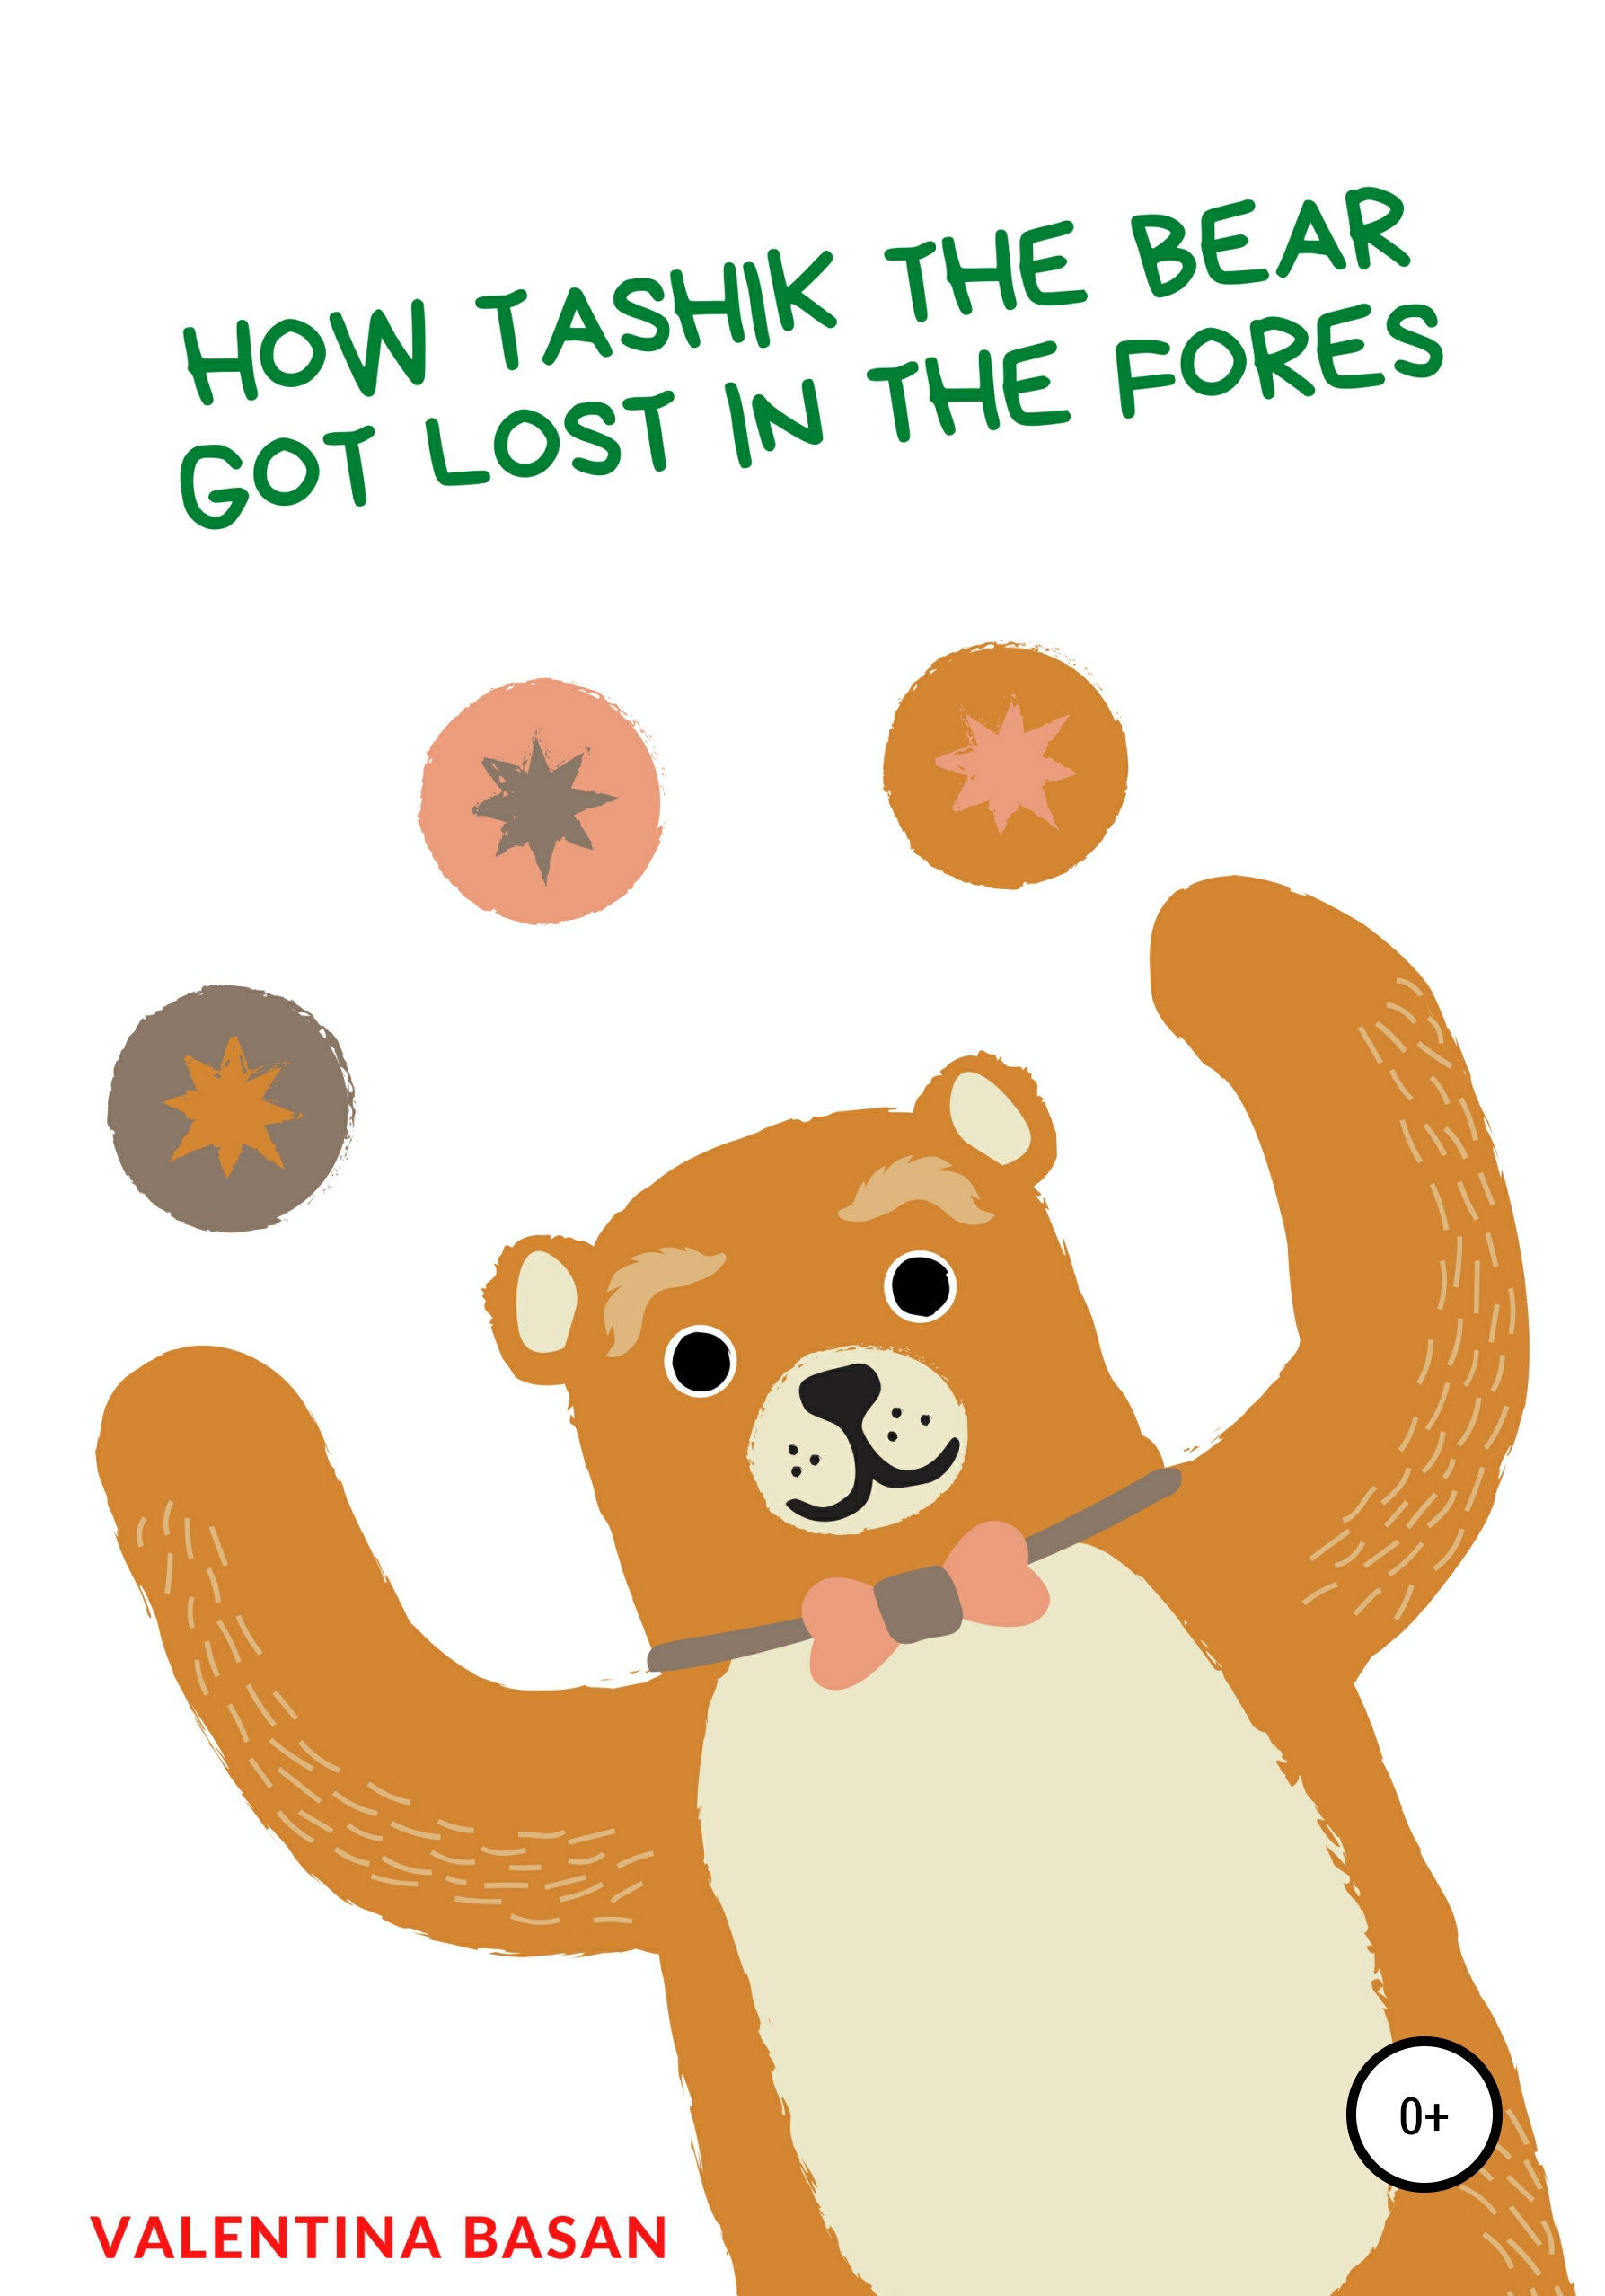 How Tashik the bear got lost in the forest